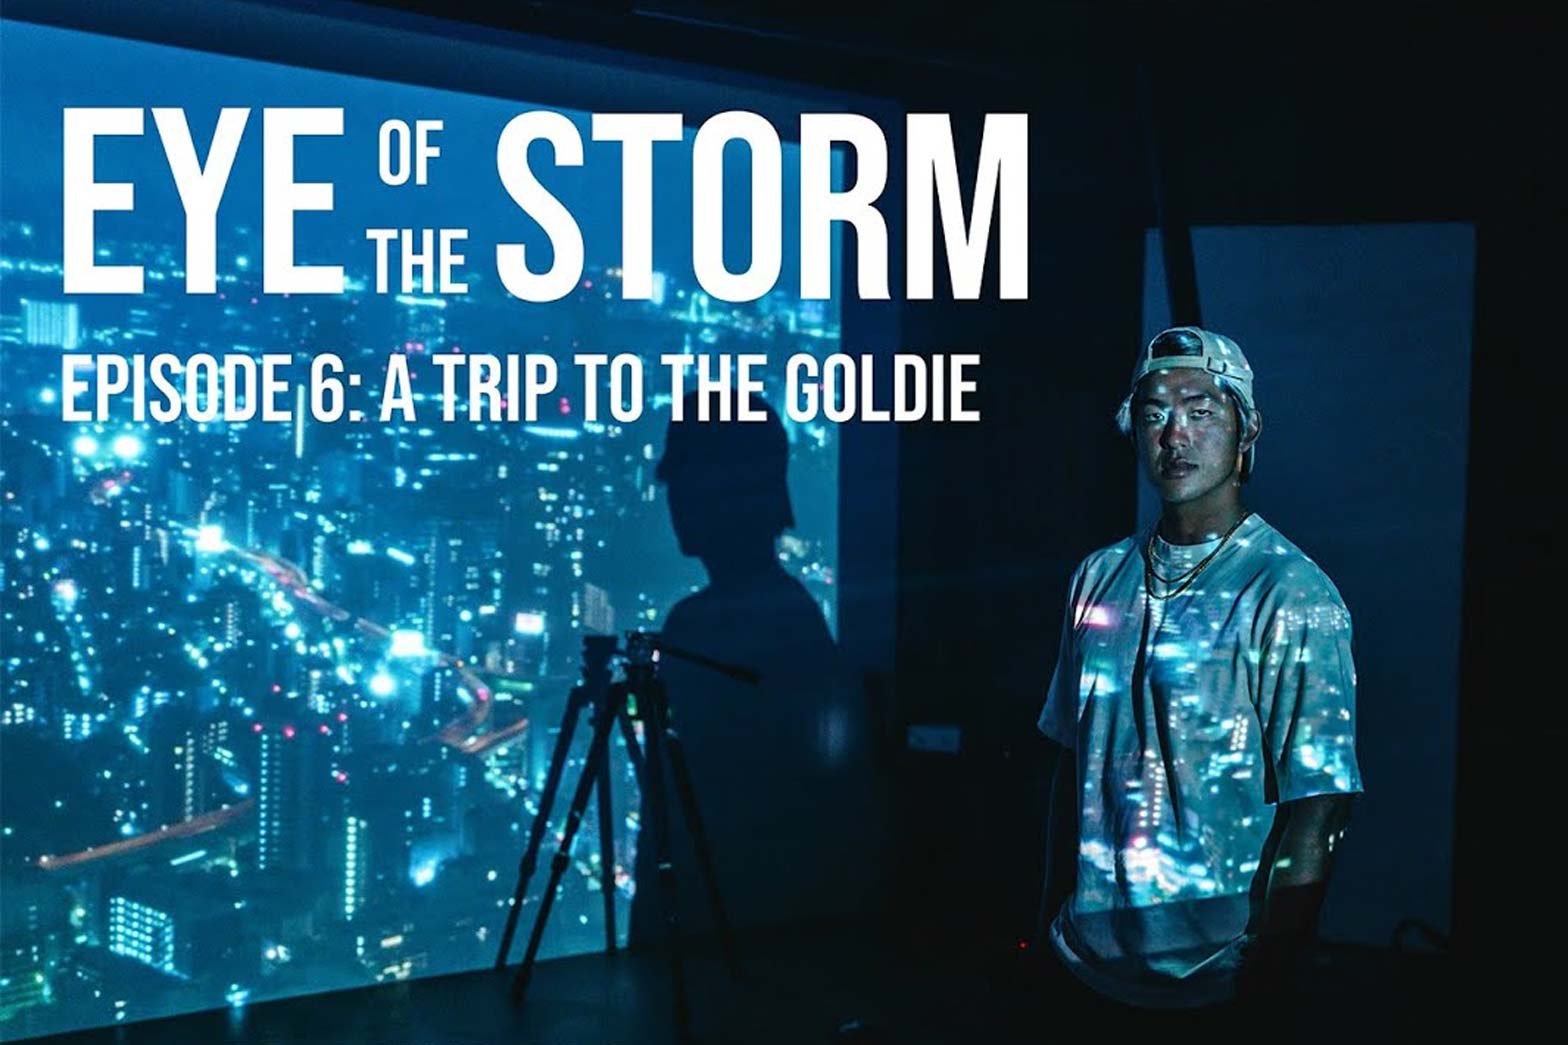 EYE OF THE STORM 6 featuring Kanoa Igarashi is now out